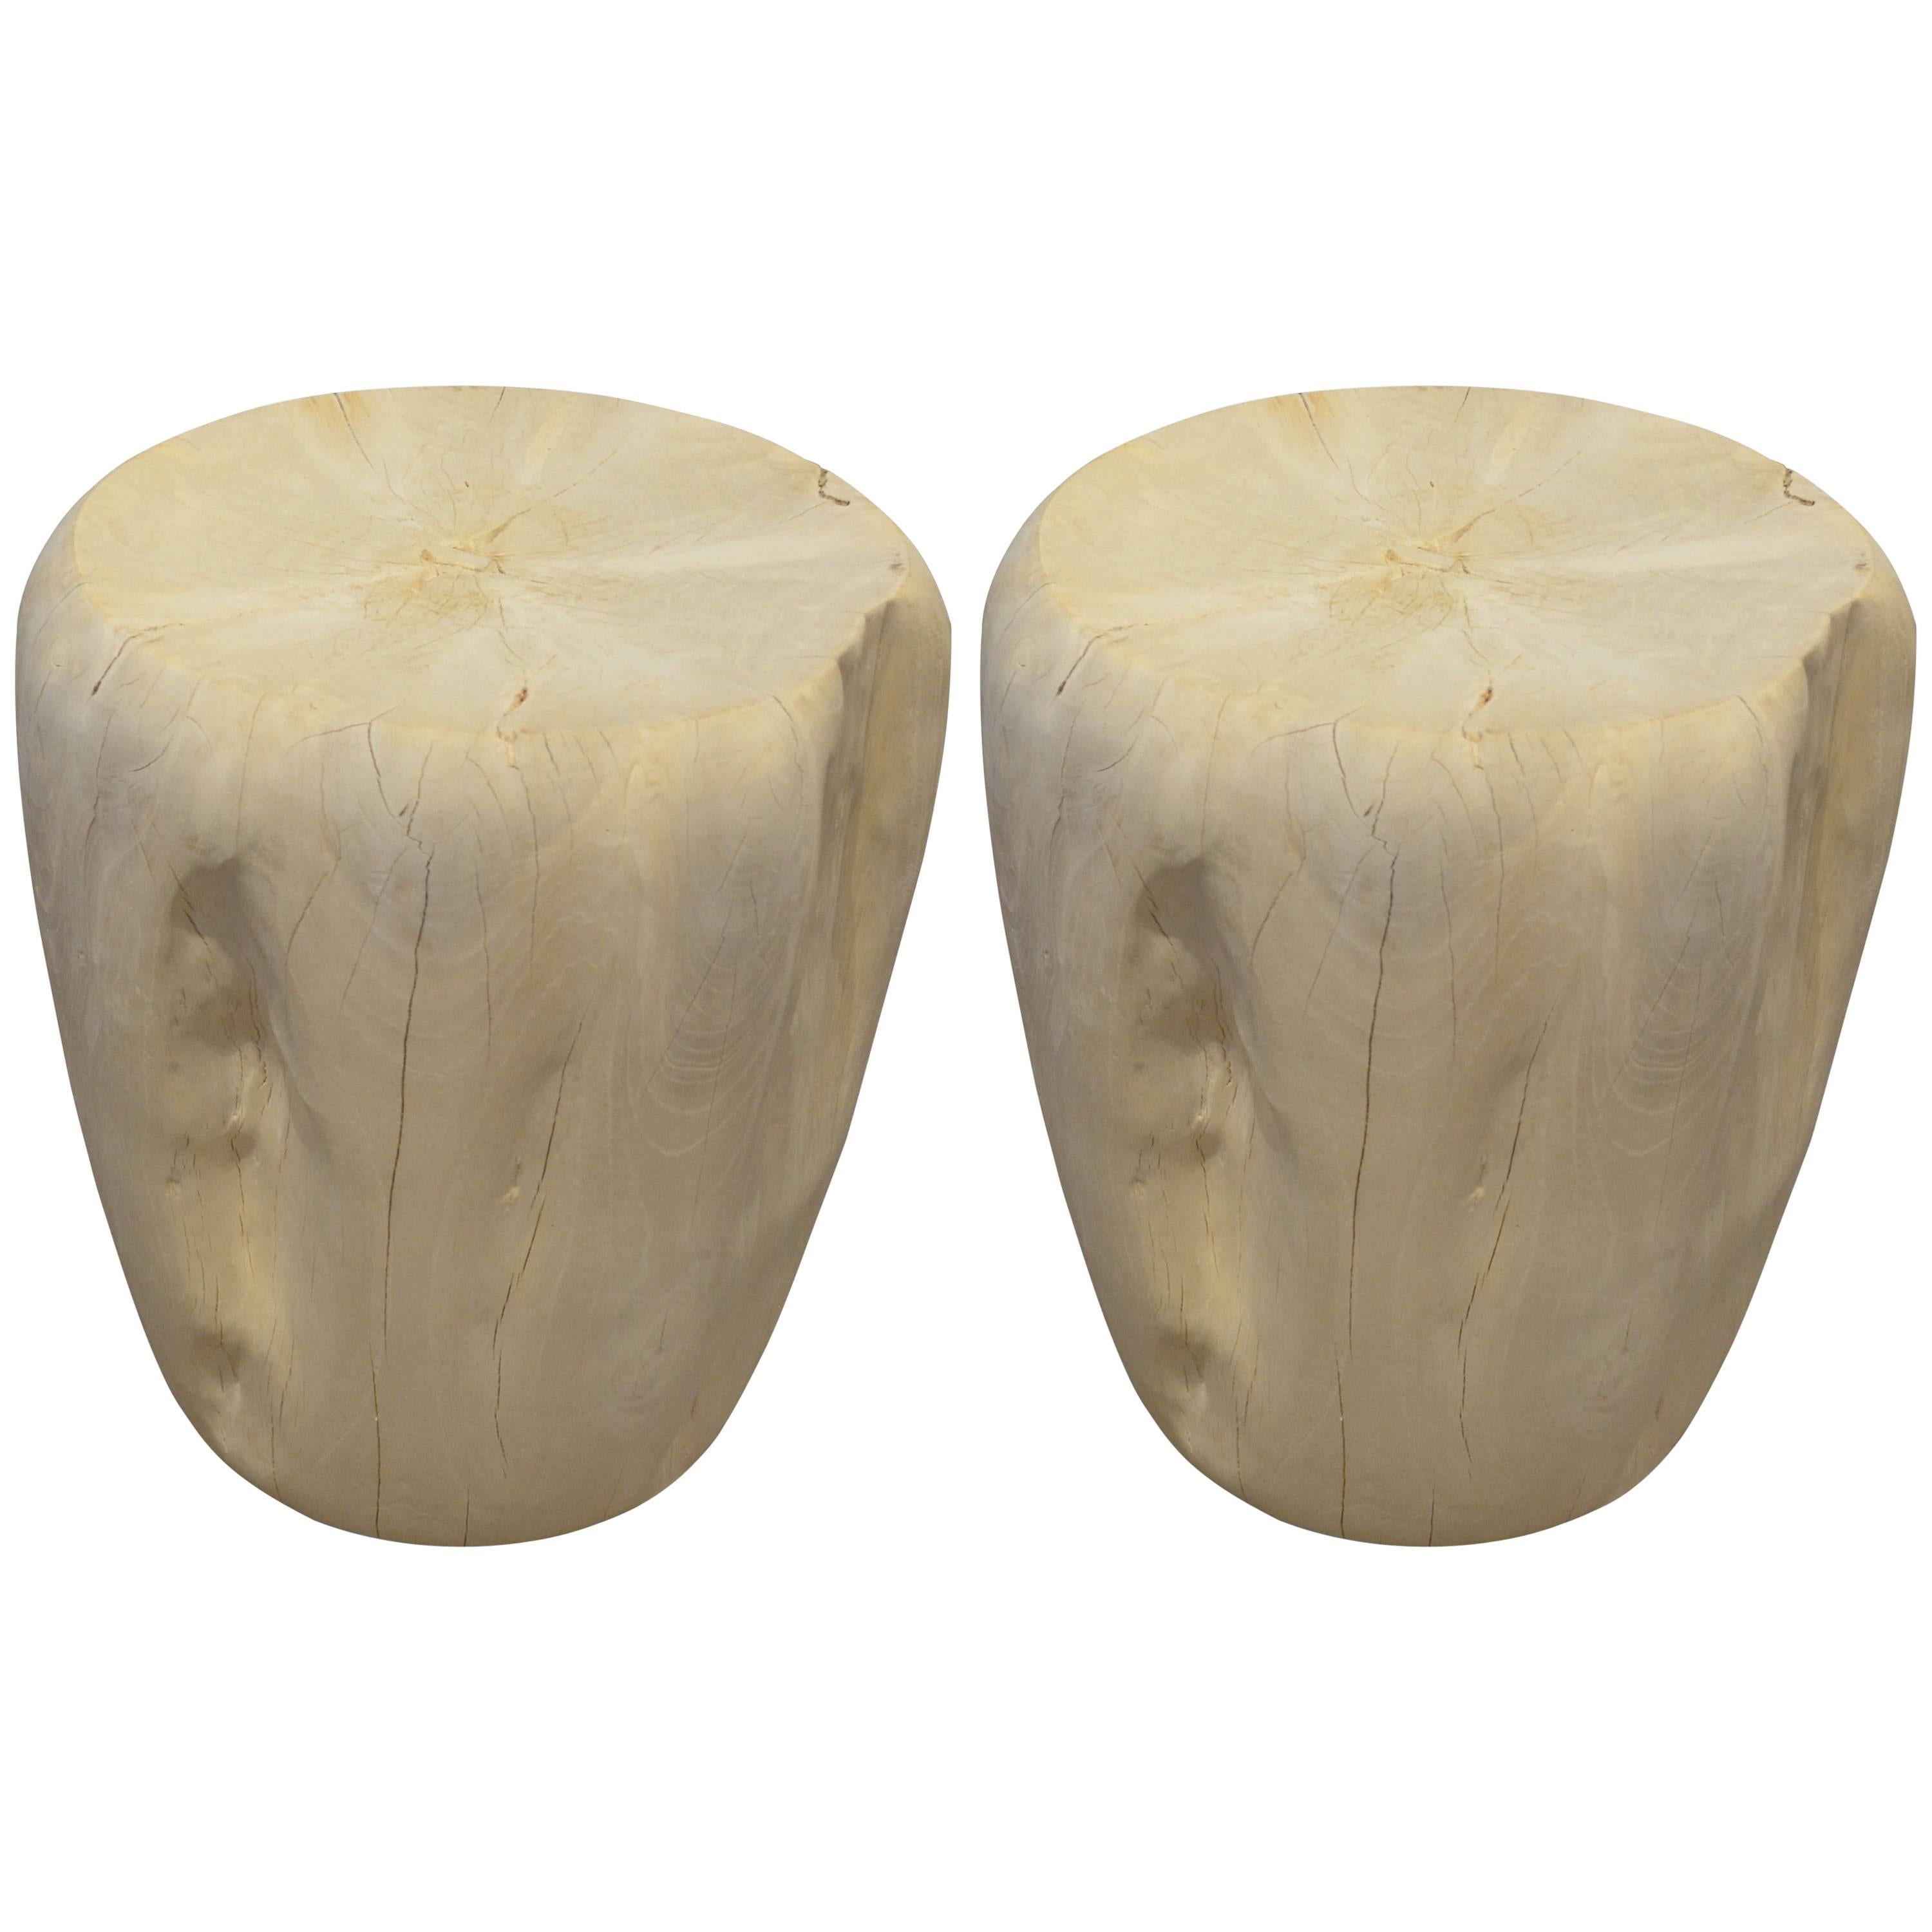 Andrianna Shamaris Hand-Carved Bleached Teak Wood Side Tables